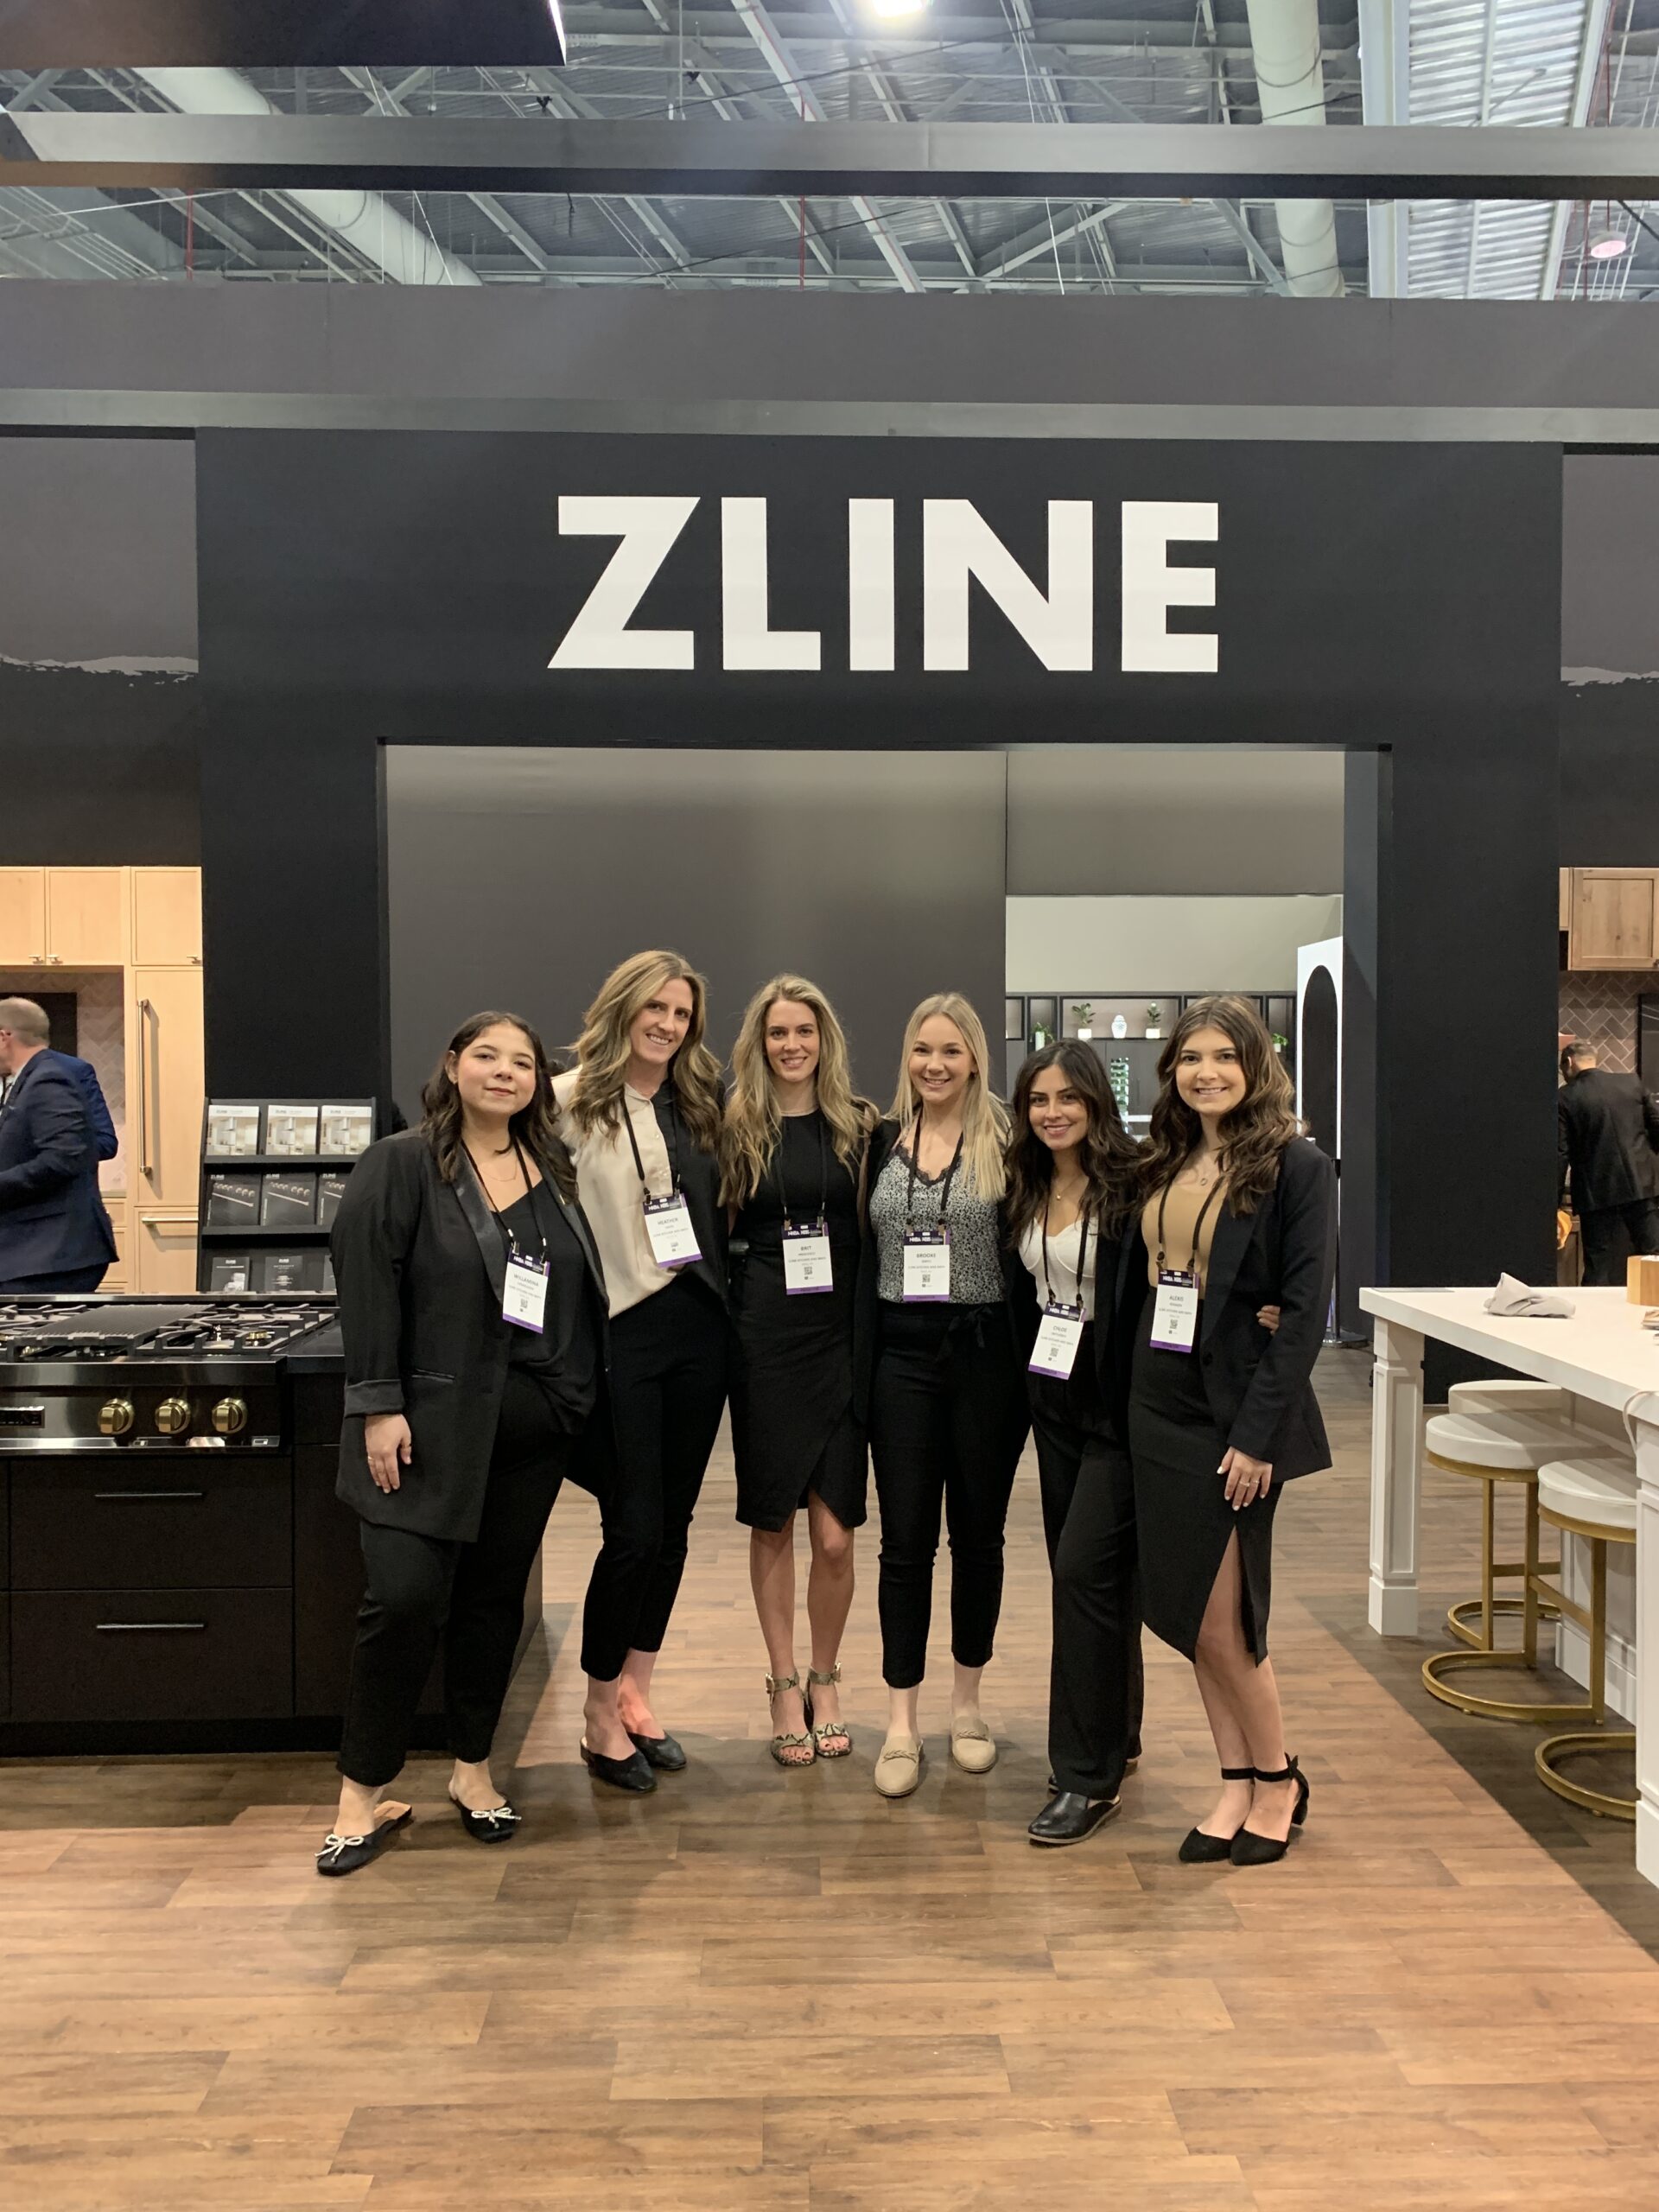 Featured image showing a group of stylish ZLINE Employees at an event standing together in front of a modern and sophisticated ZLINE Booth wearing badges, and smiling at the camera.